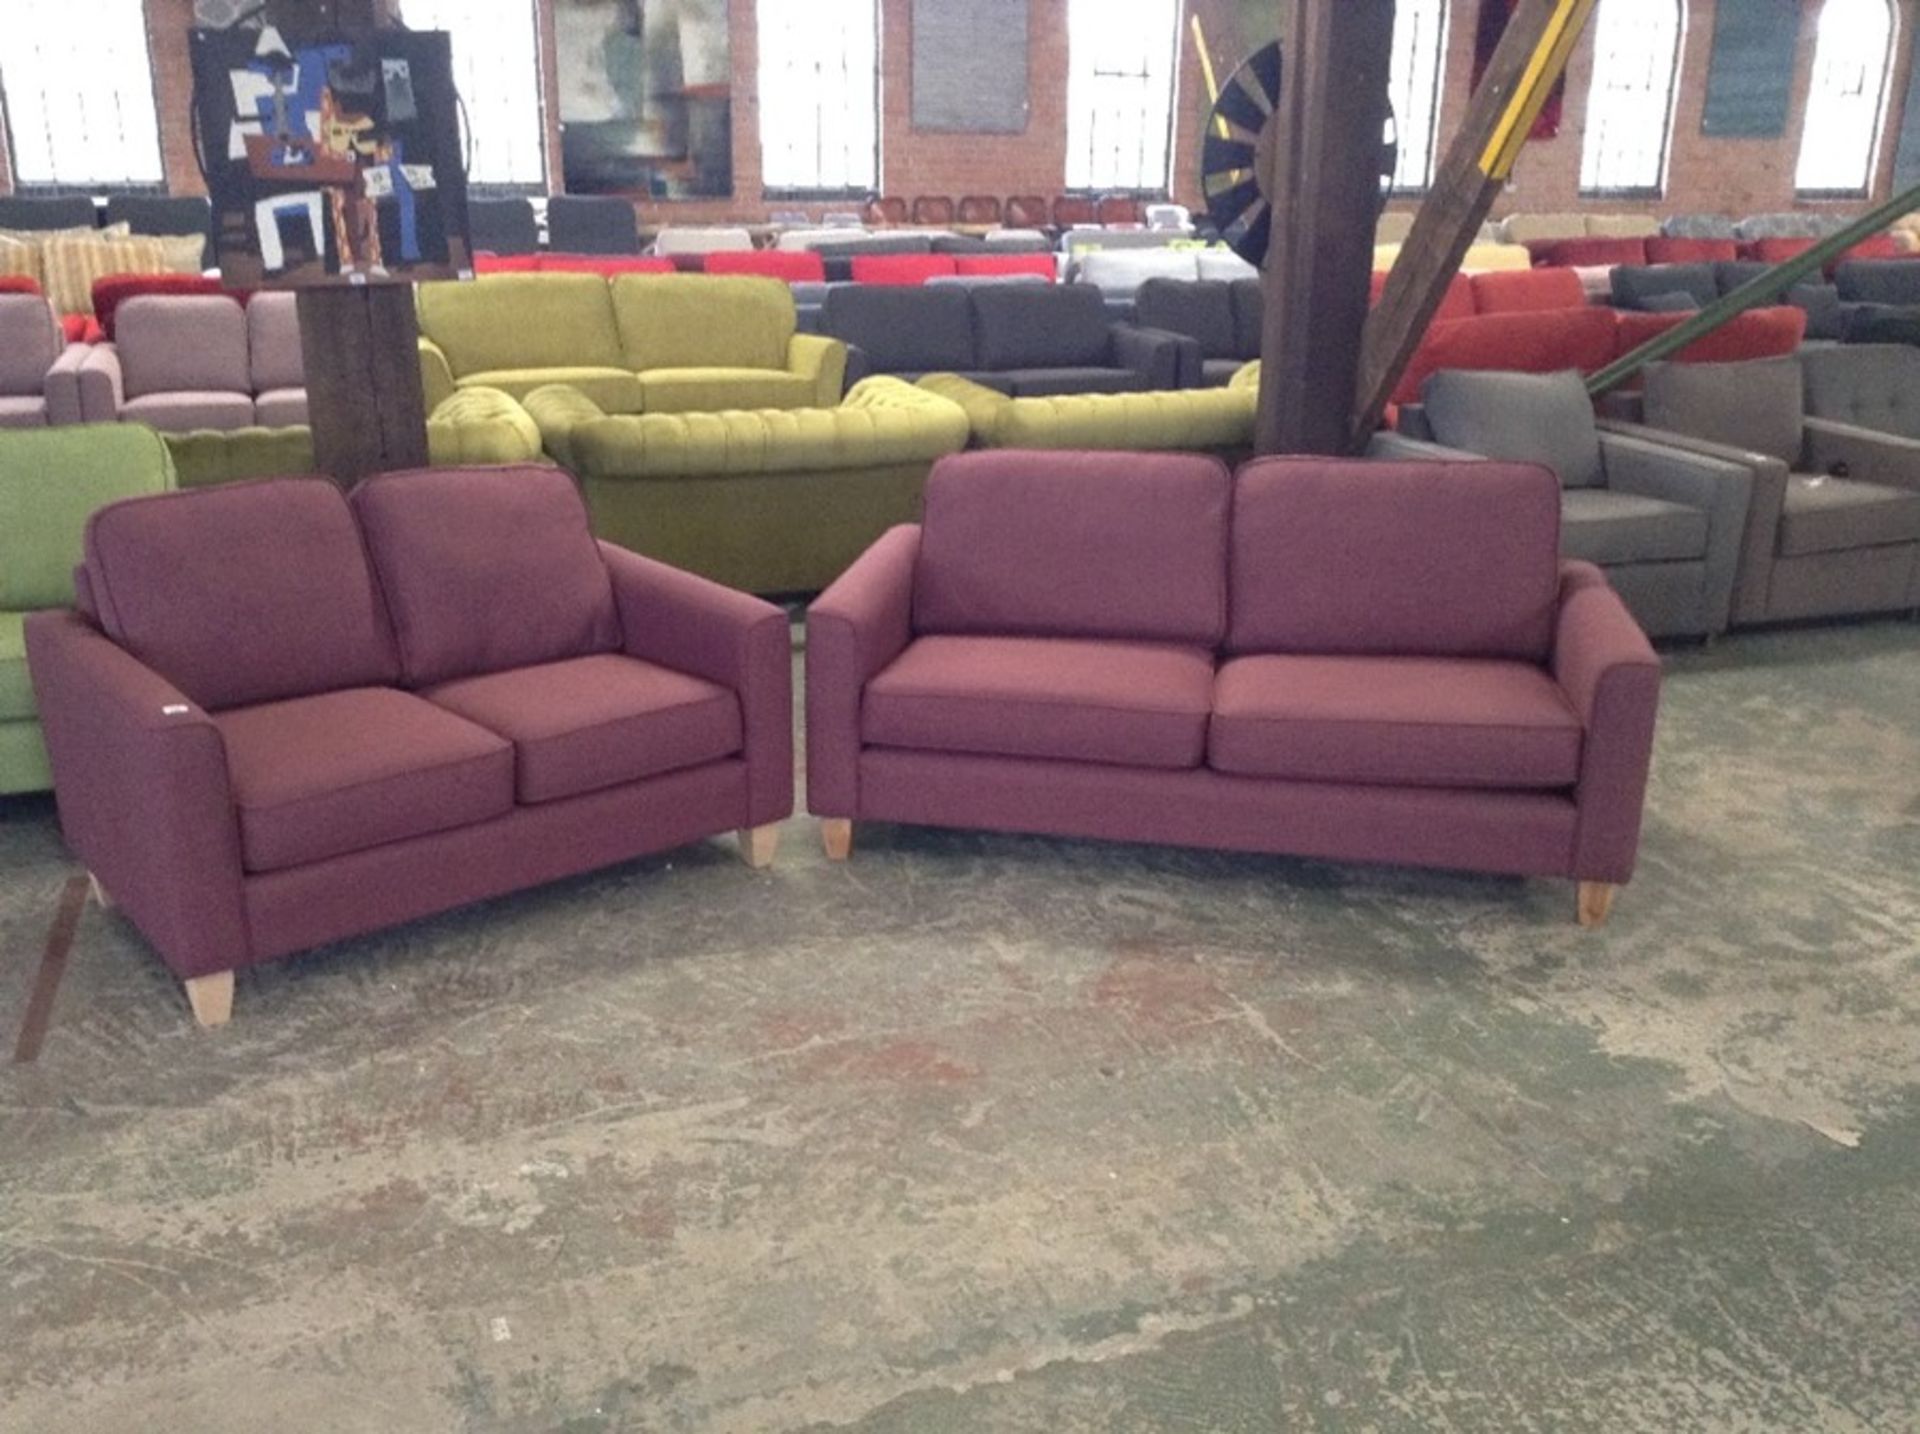 PORTIA Turin Mulberry 2.5 str and 2 SEATER (SFL913